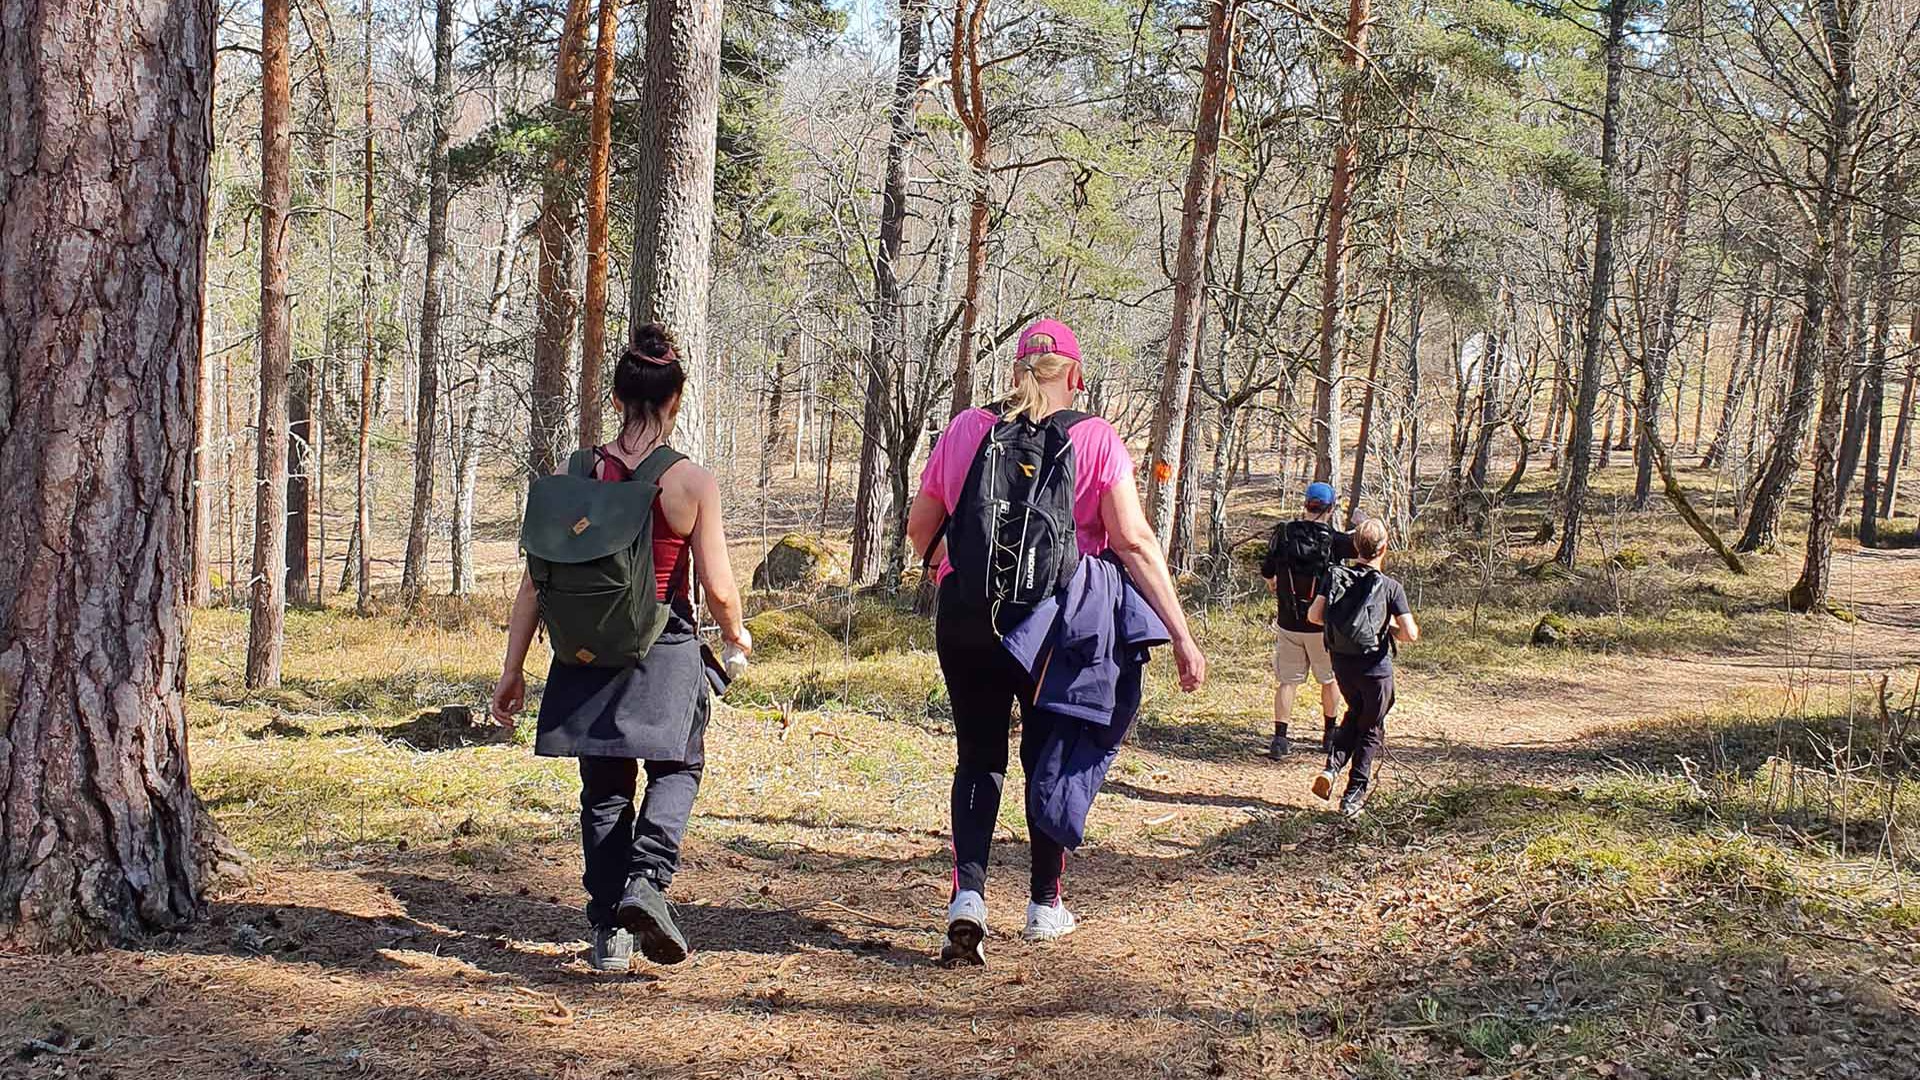 People hiking in a sunlit forest